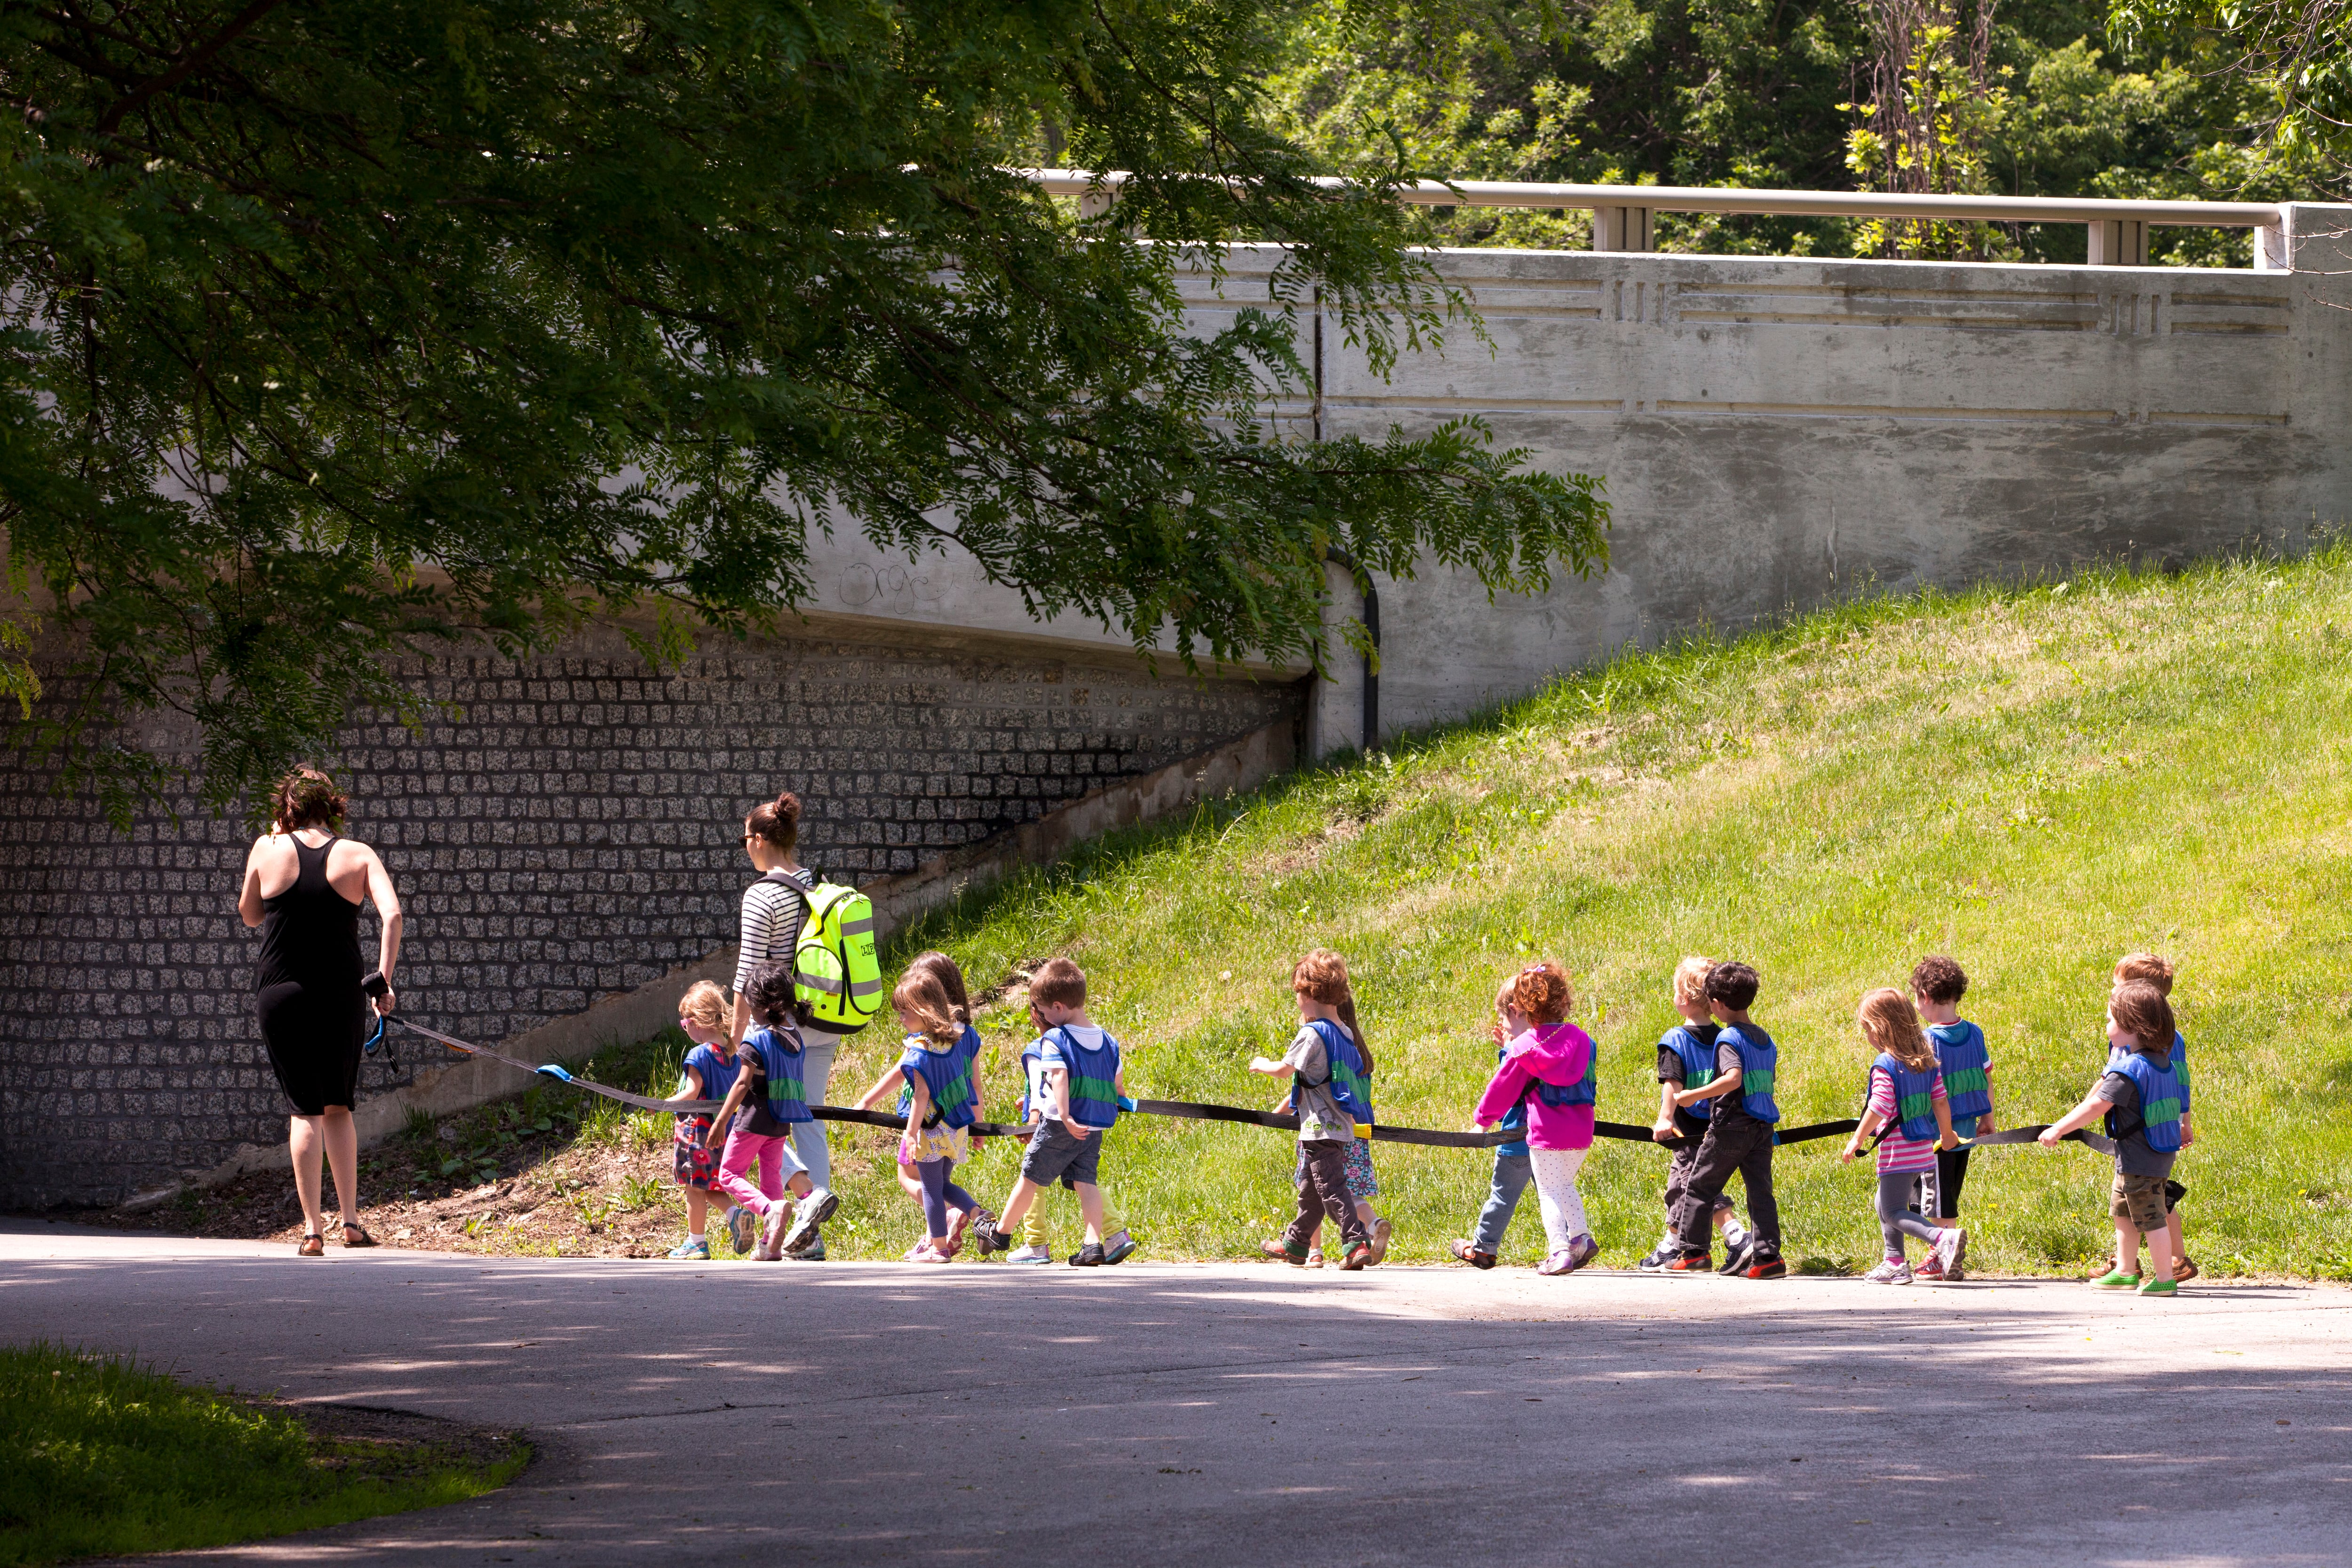 Daycare children on a long leash and their caretakers enjoy a walk through a Chicago park